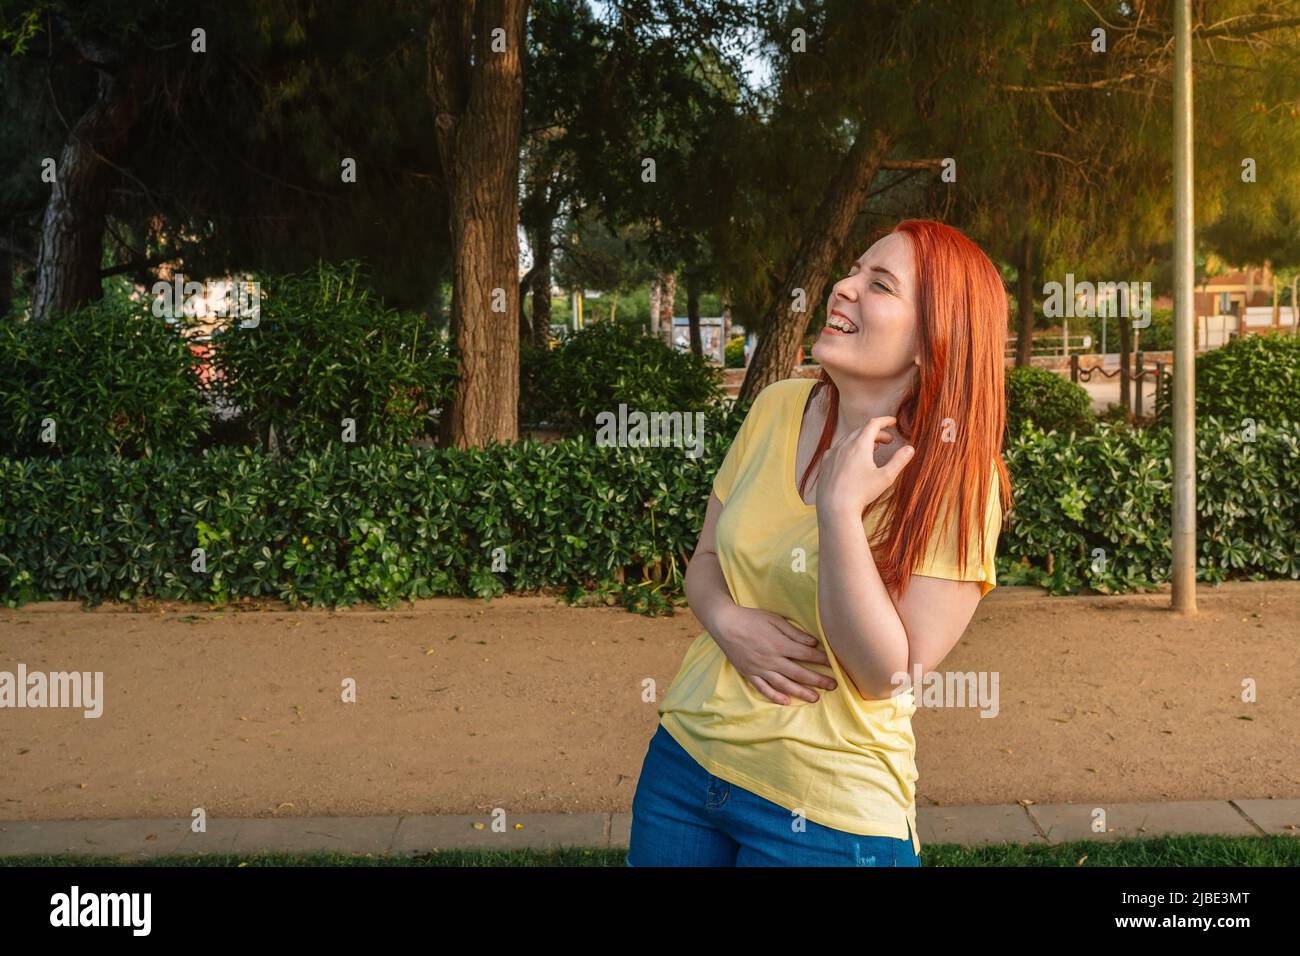 young redhead girl laughing out loud in a public park. woman enjoying the weekend or her summer holiday. Stock Photo